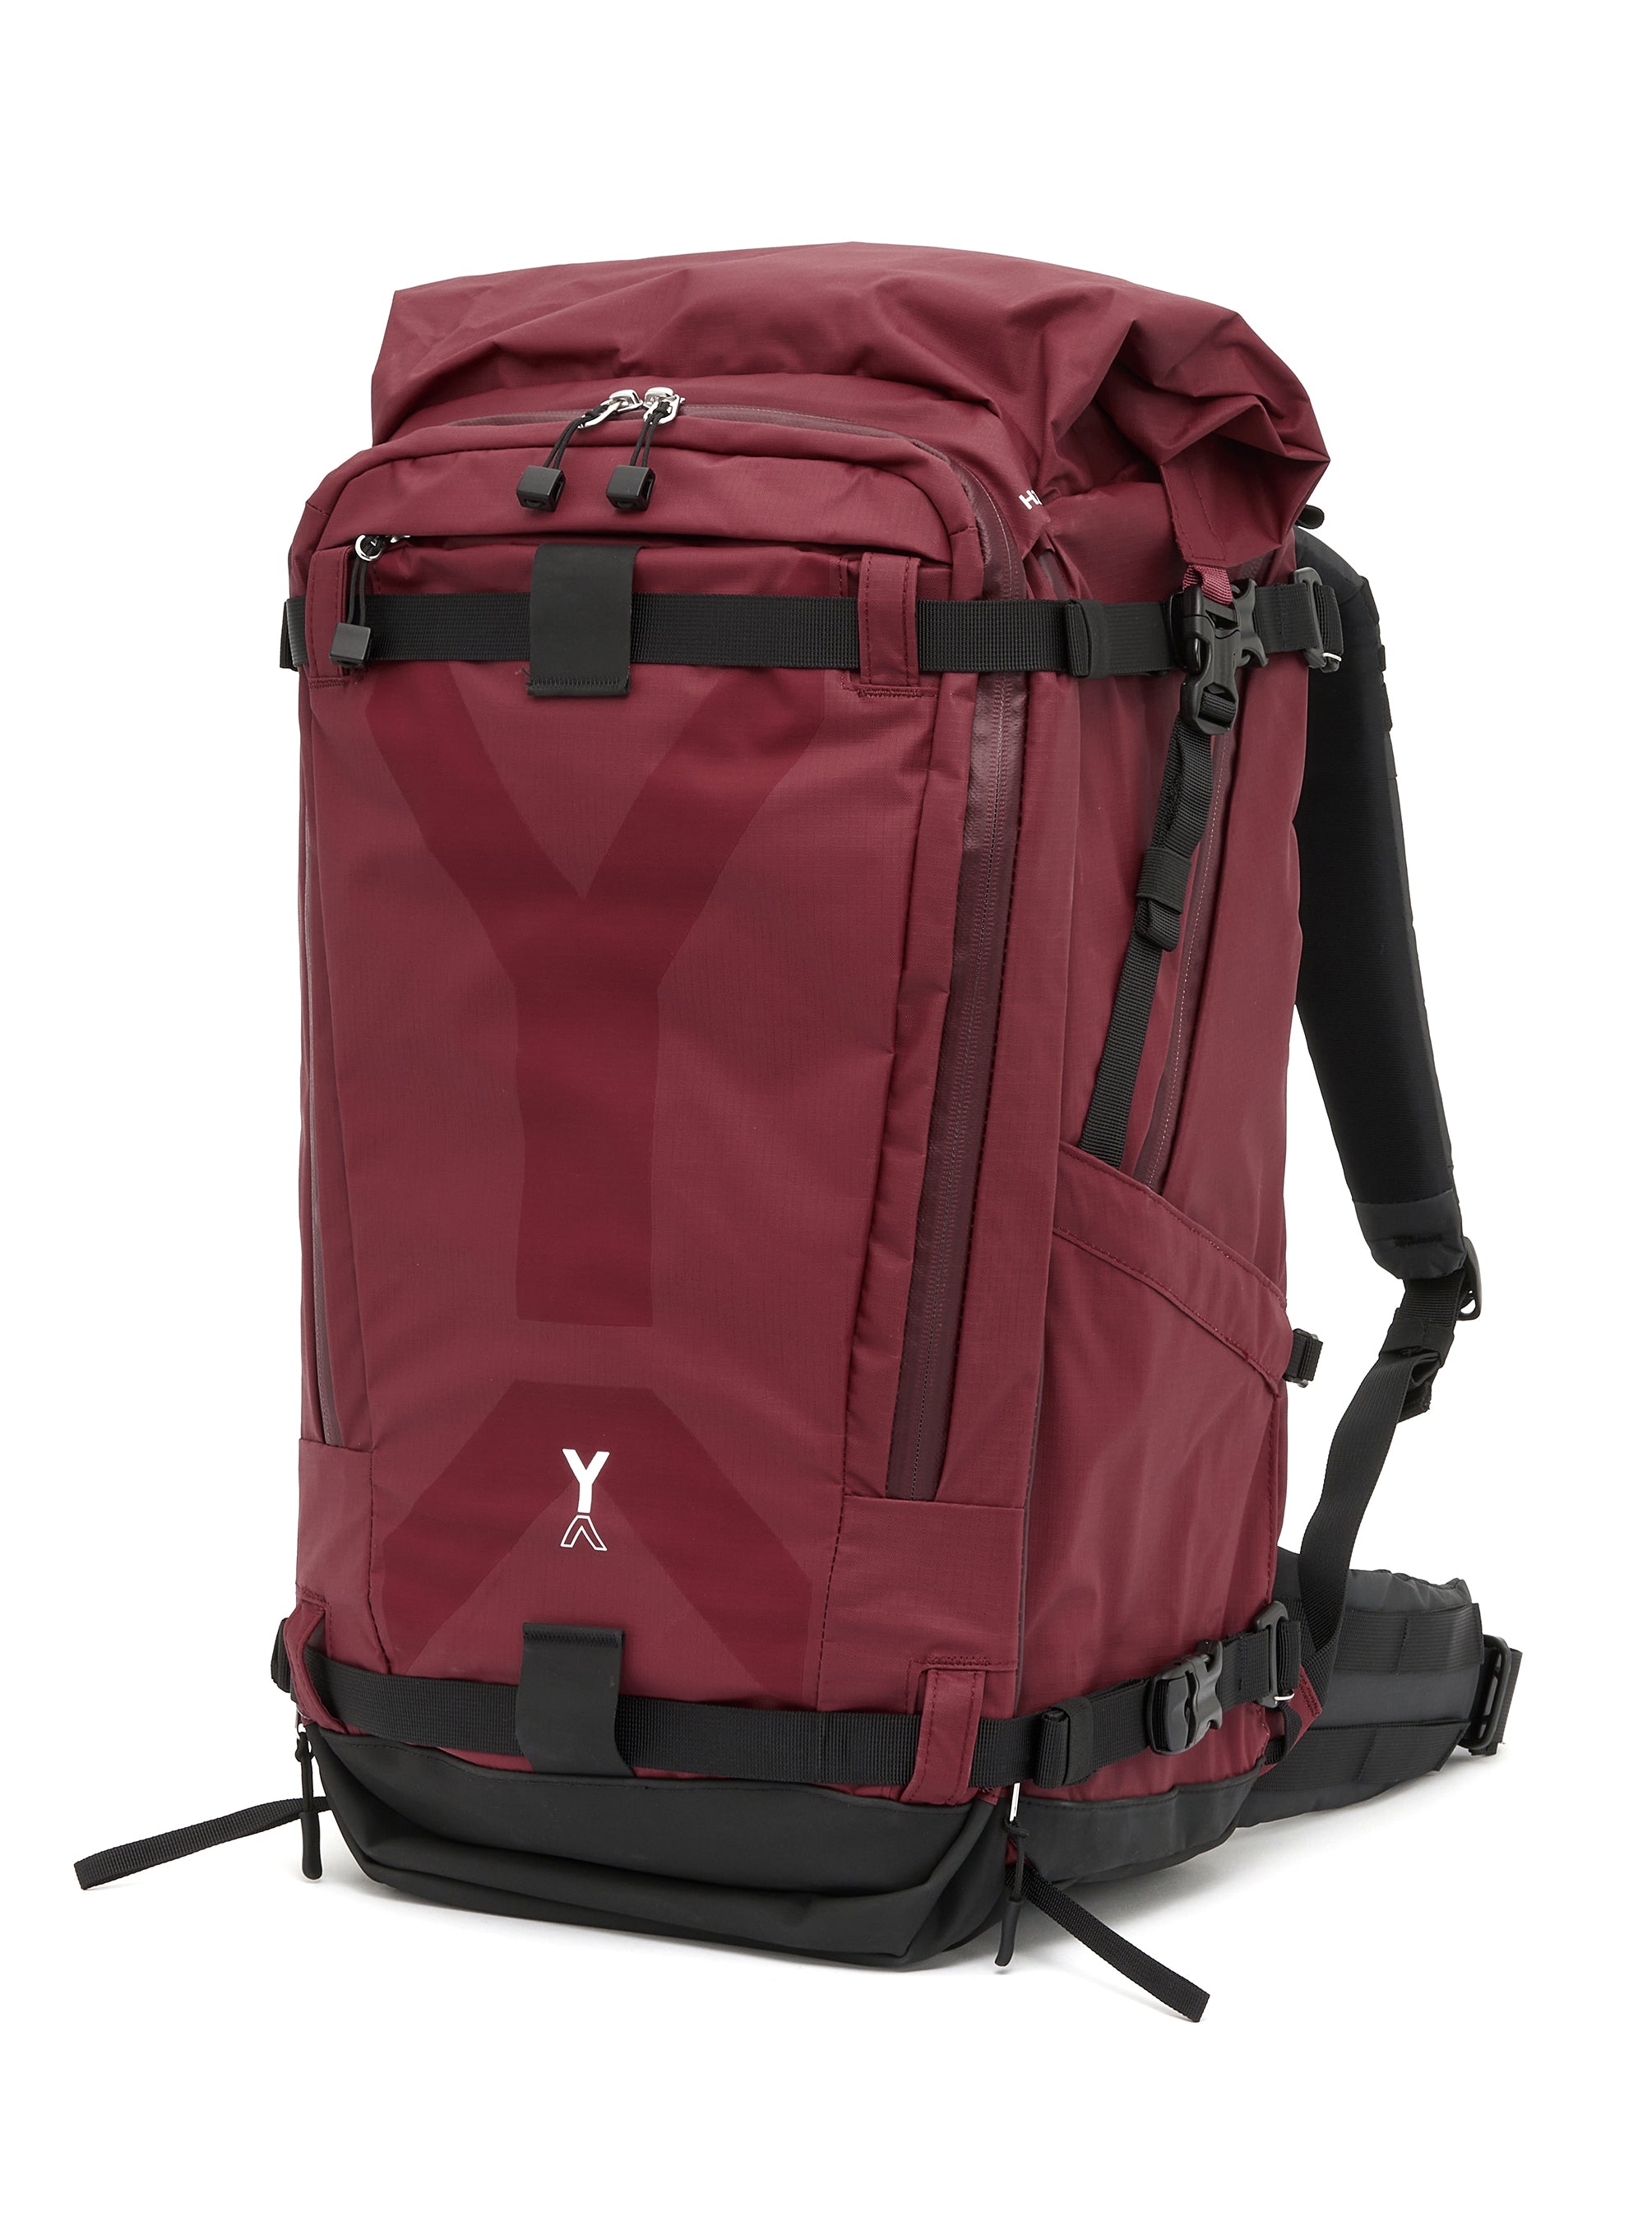 EVOC Gear Backpack 60 - Nomad Frontiers